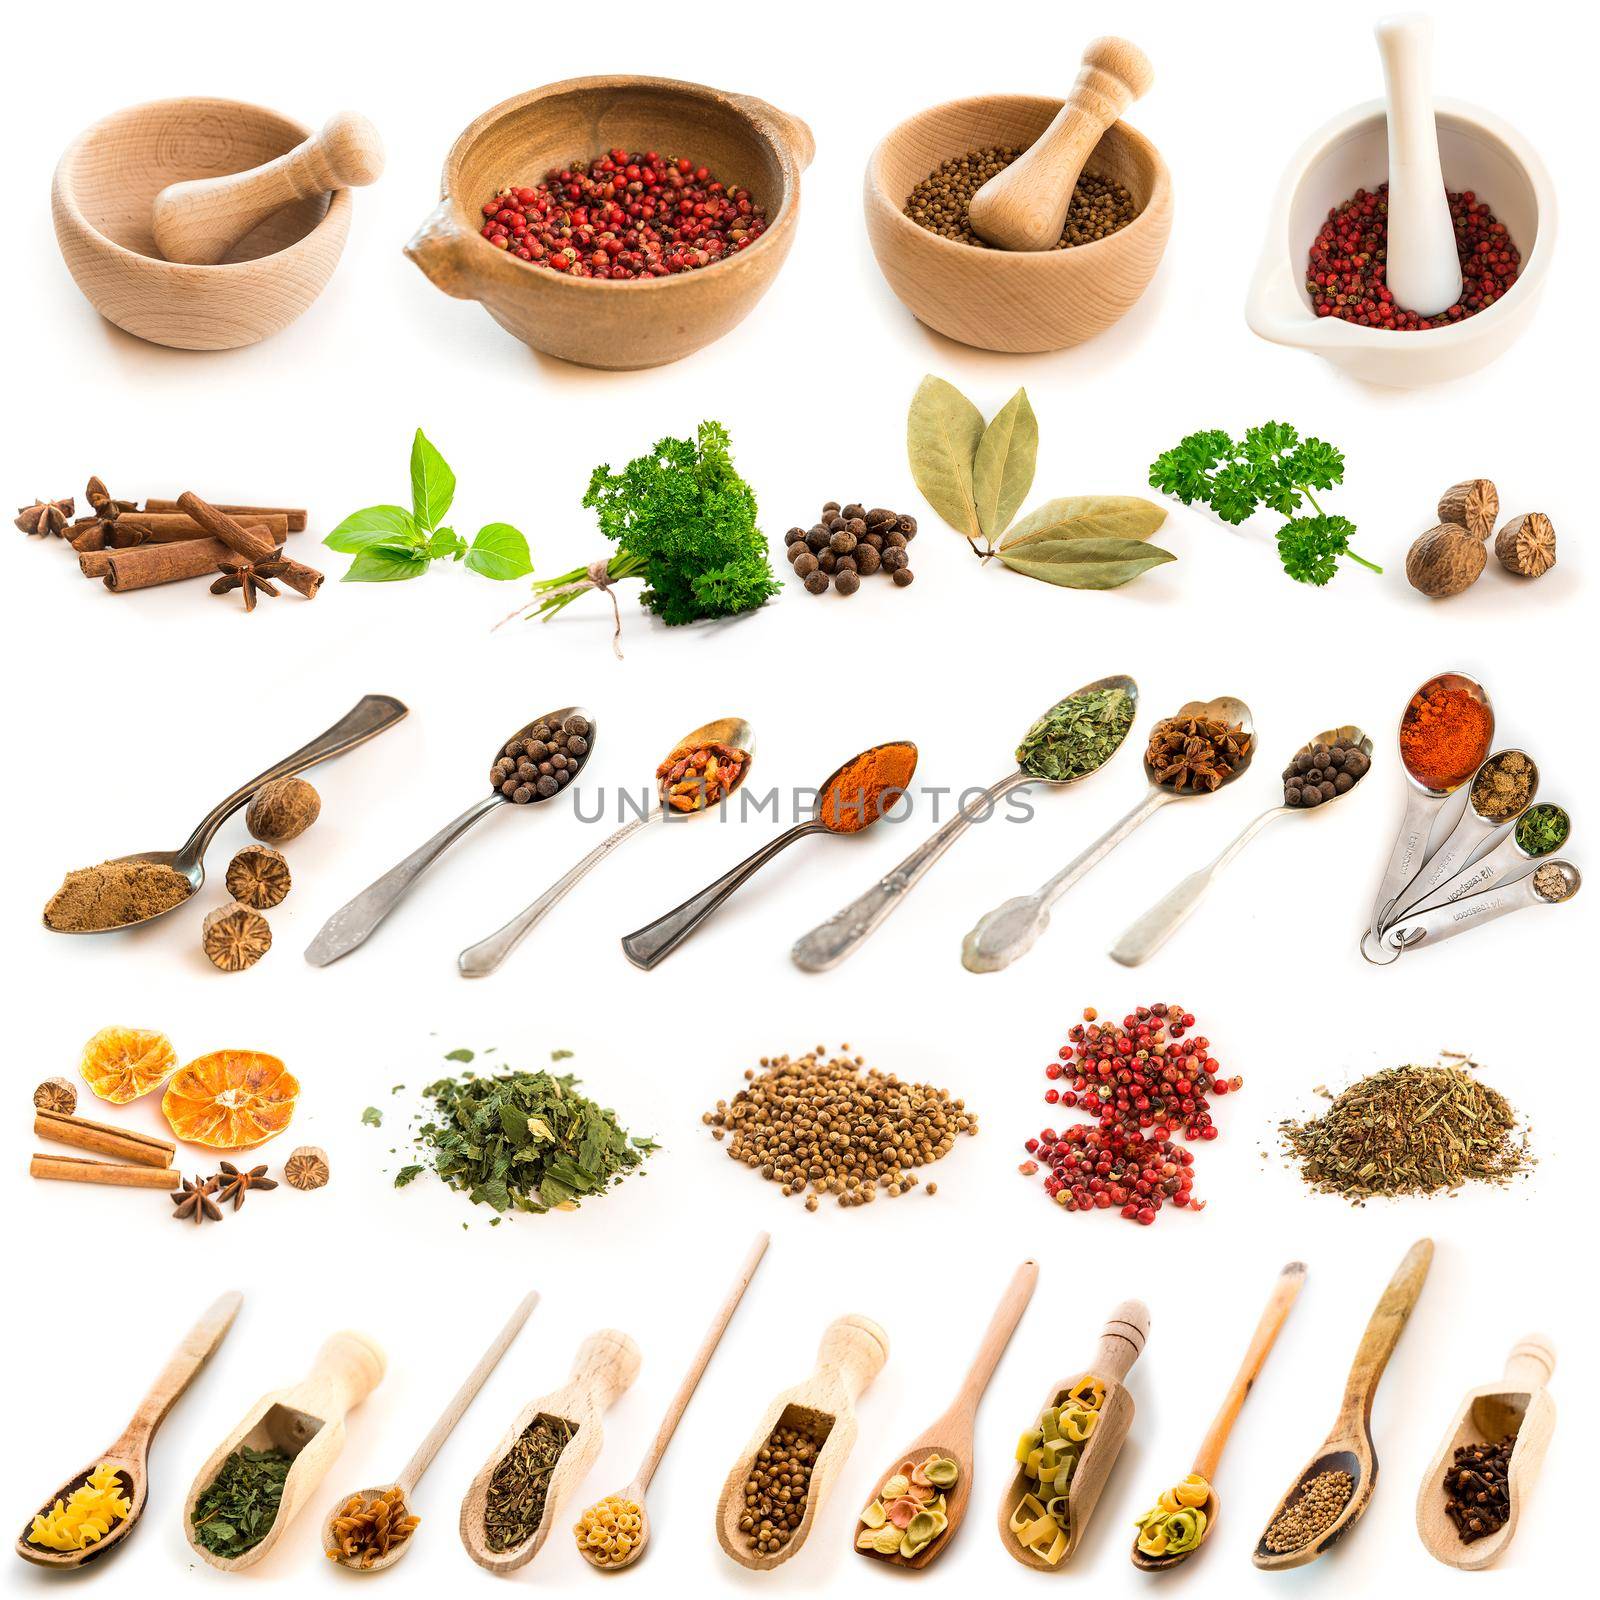 Collage of photos of different spices on spoons and dishes on a white background